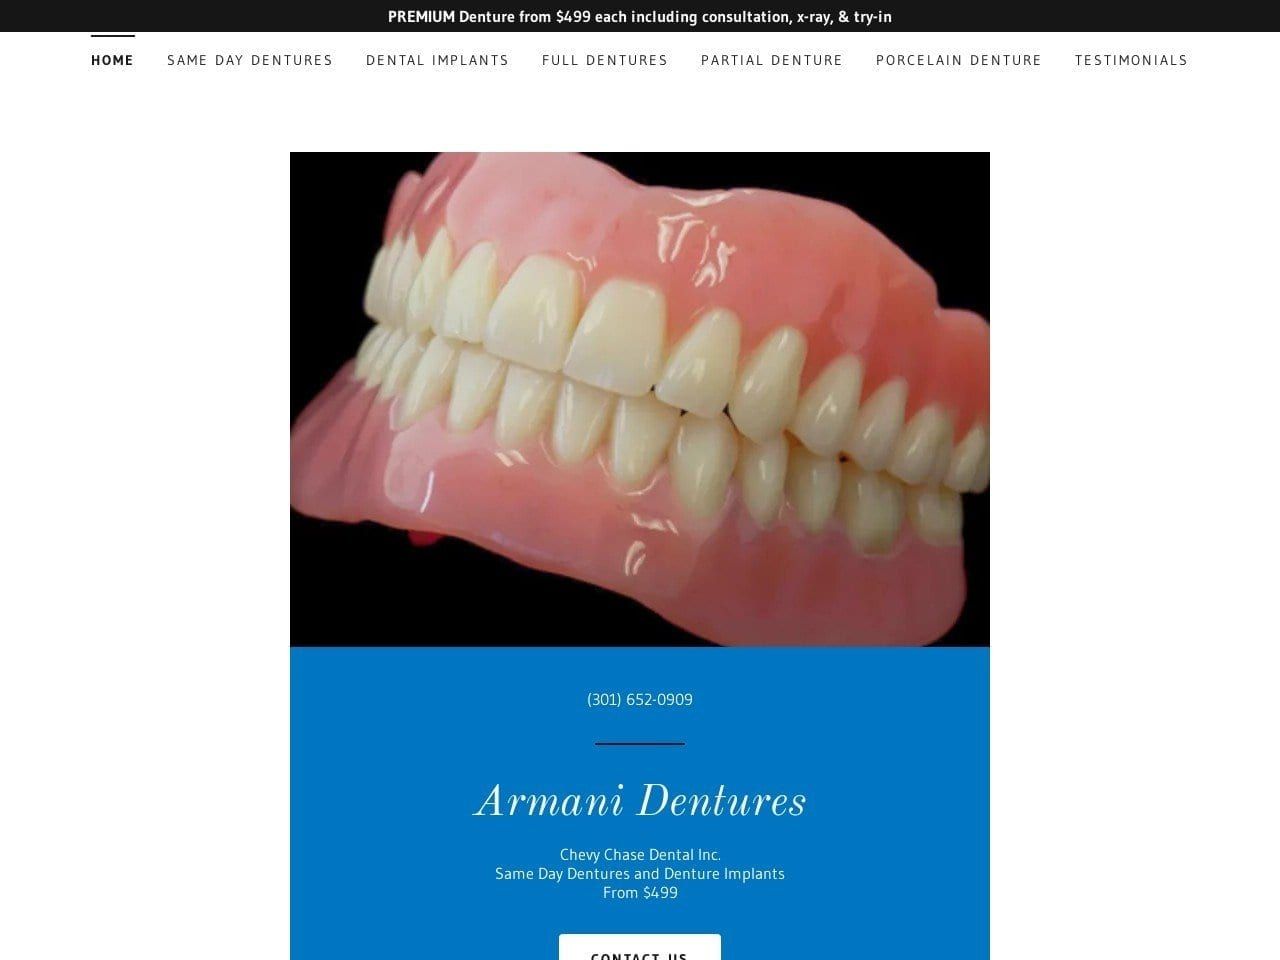 Armani Dentures Chevy Chase Dental Inc Website Screenshot from armanidentures.com